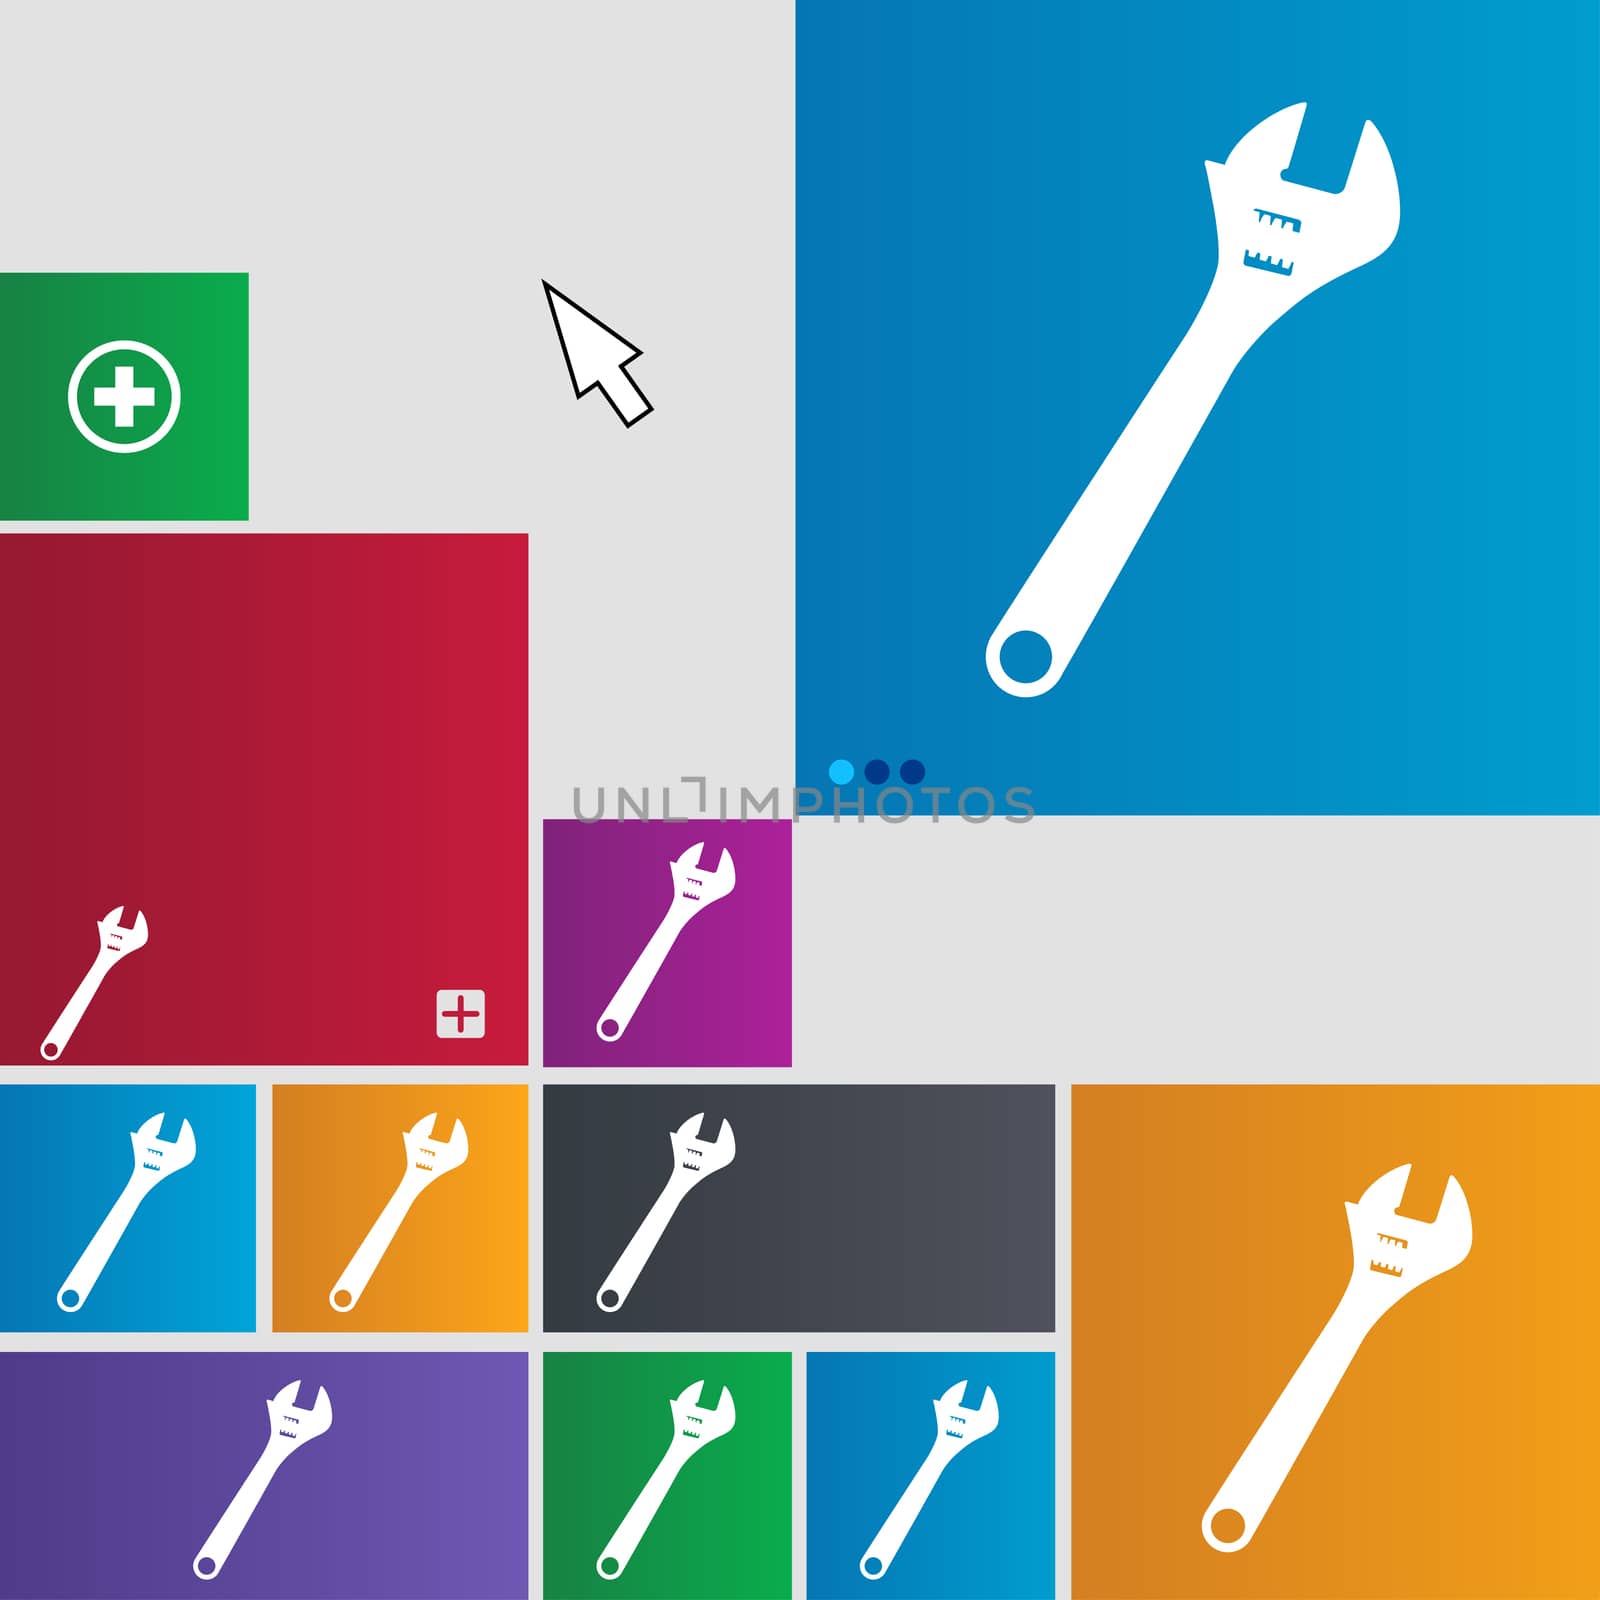 wrench icon sign. buttons. Modern interface website buttons with cursor pointer. illustration